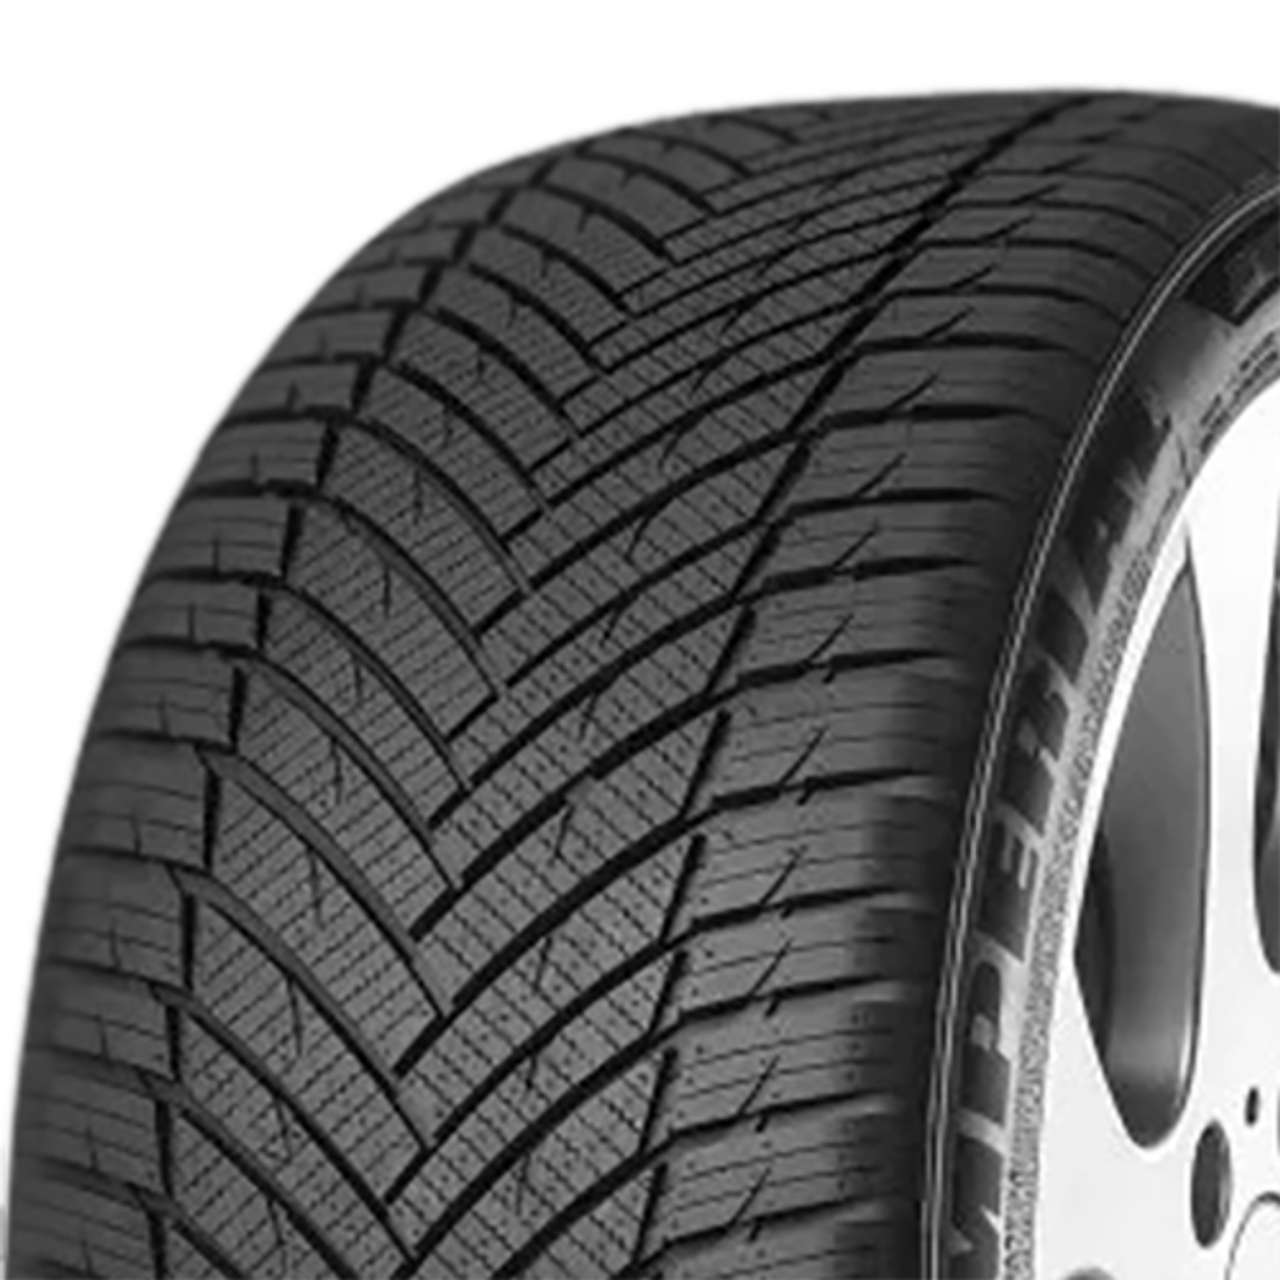 IMPERIAL AS DRIVER 205/45R16 87W